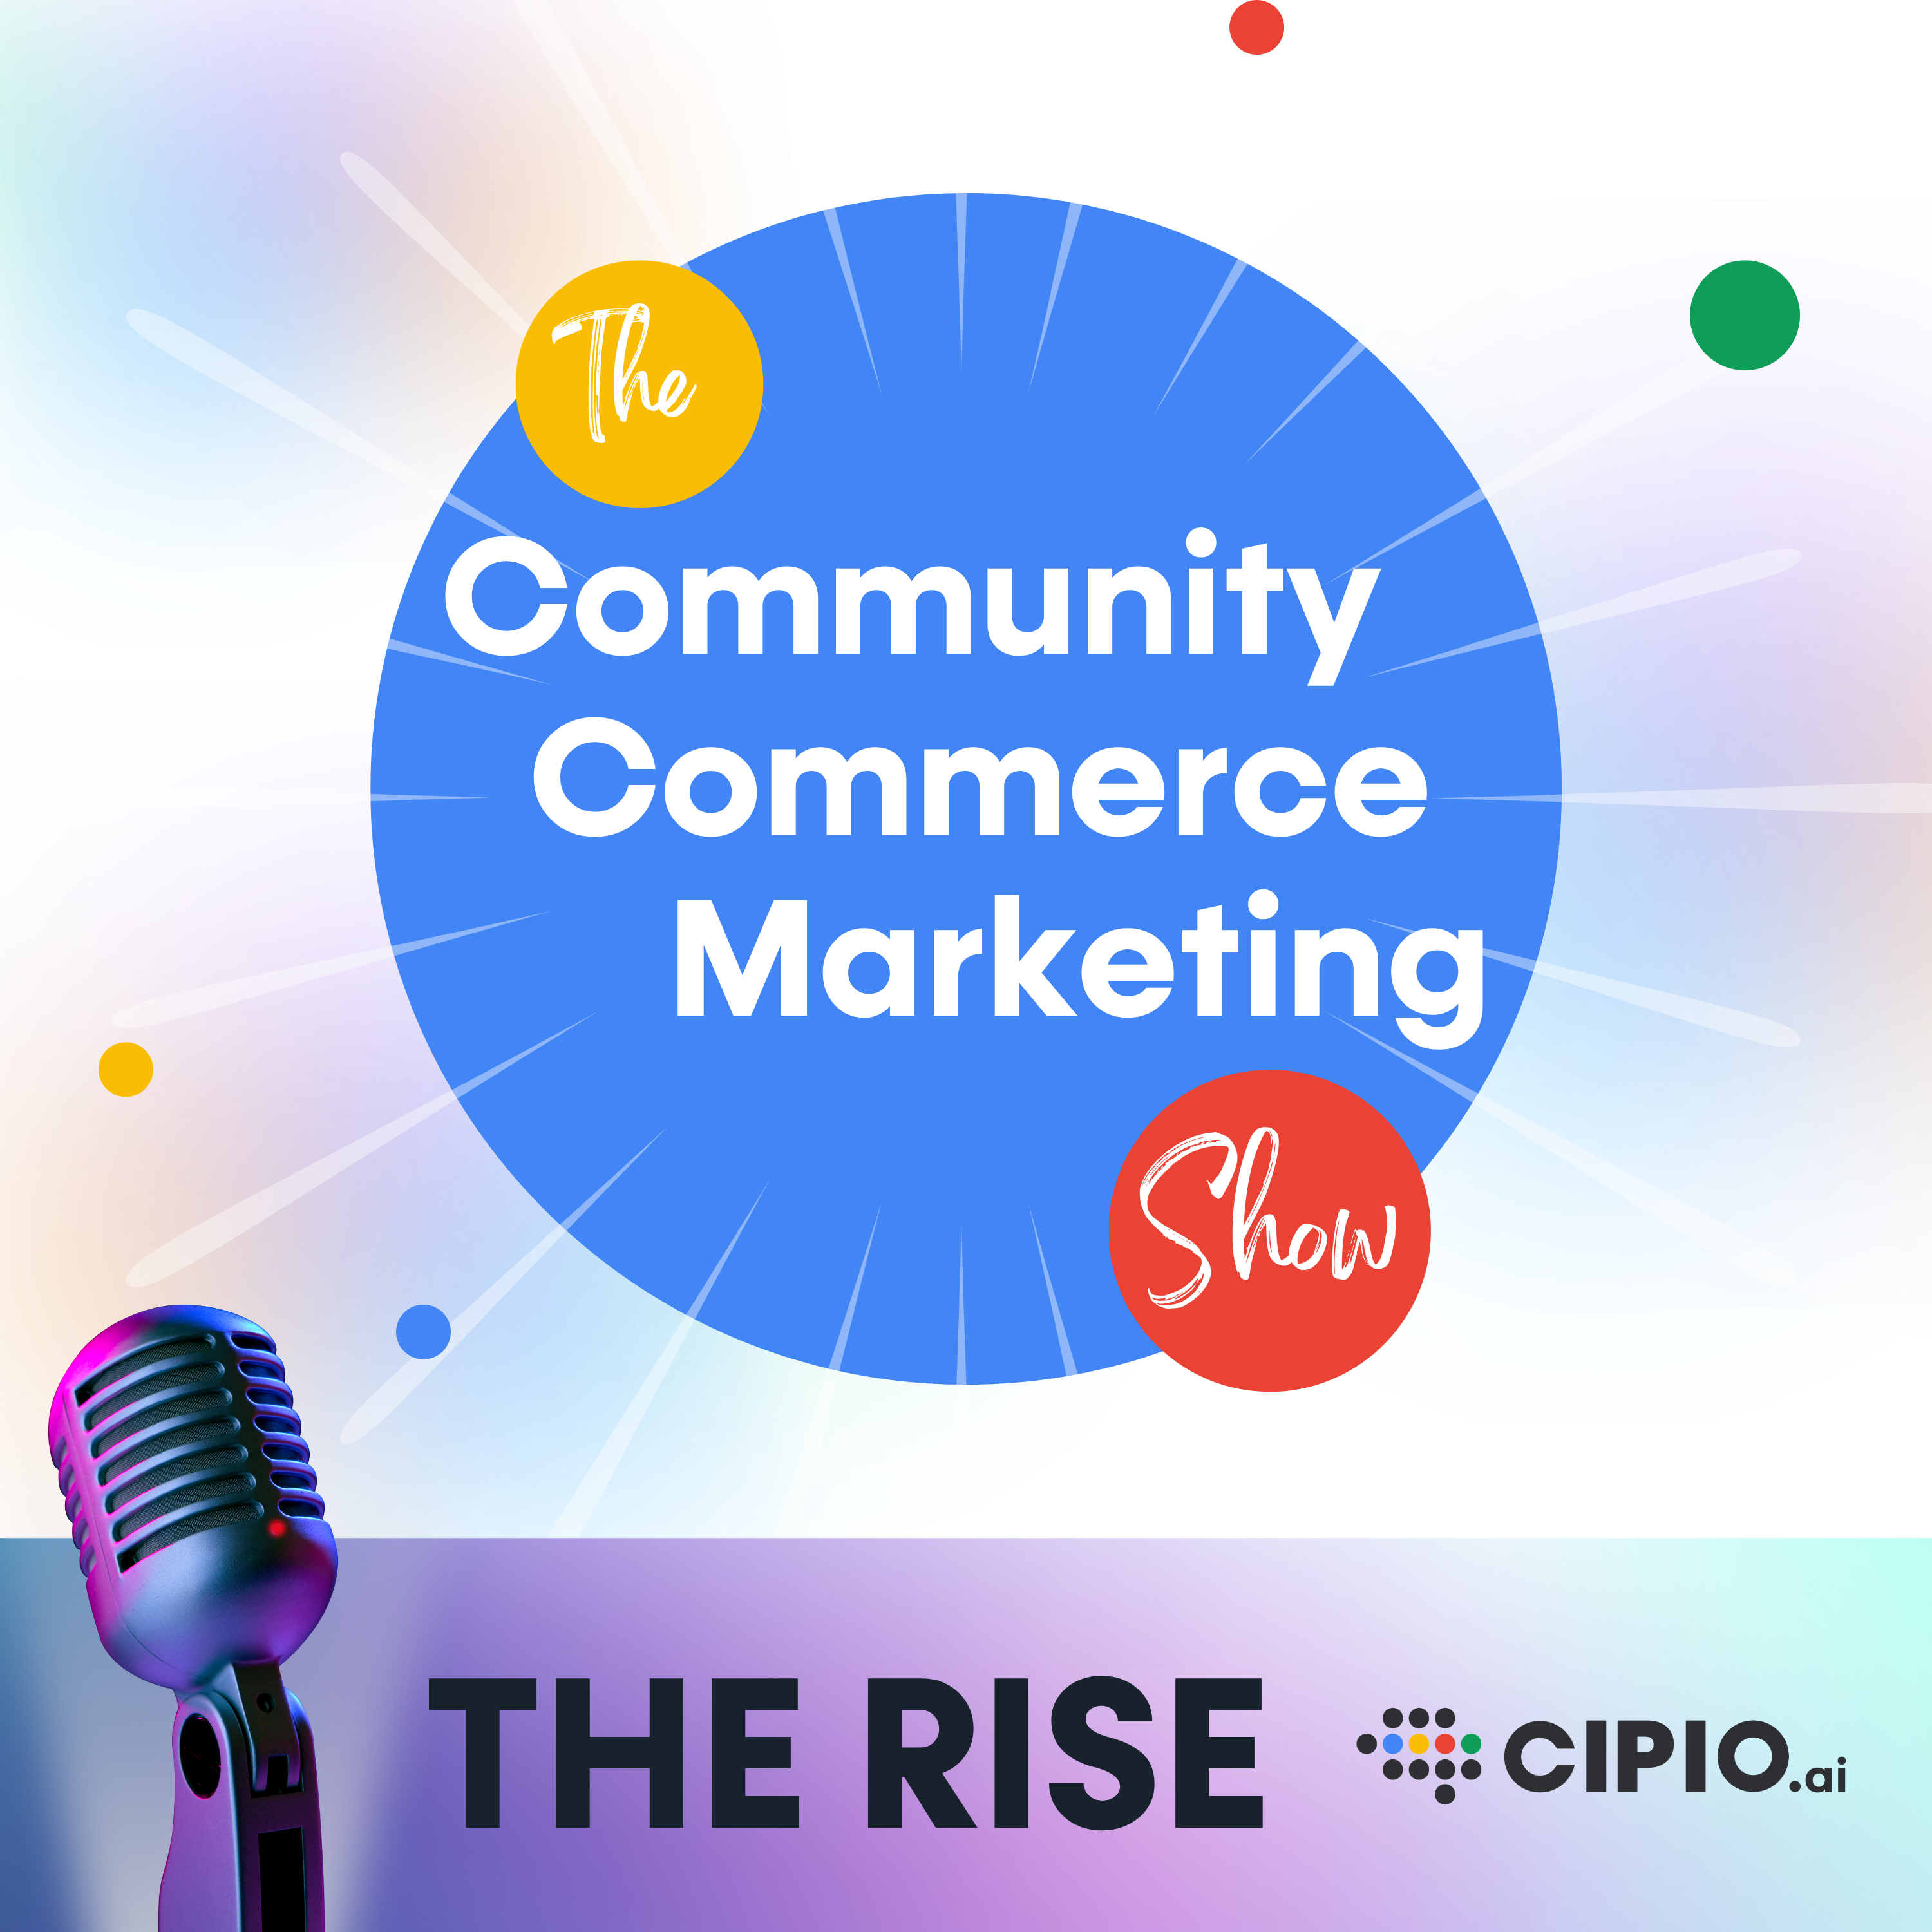 The Rise – The Community Commerce Marketing Show